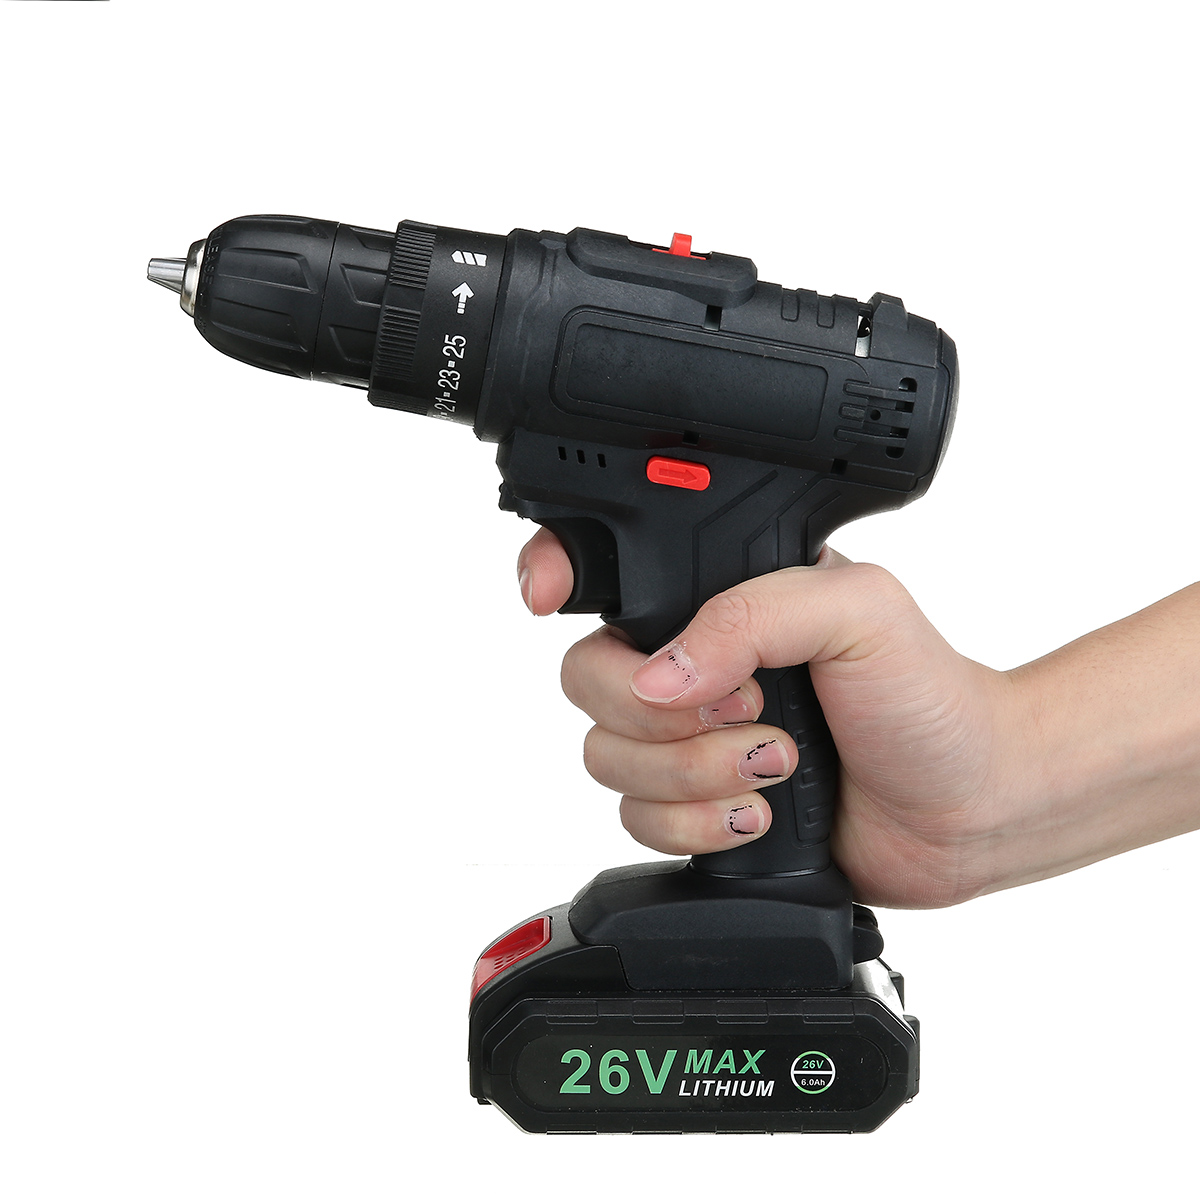 48V-1500W-Electric-Drill-28Nm-Max-Torque-LED-Light-Screwdriver-Power-W-12pc-Battery-1768846-3